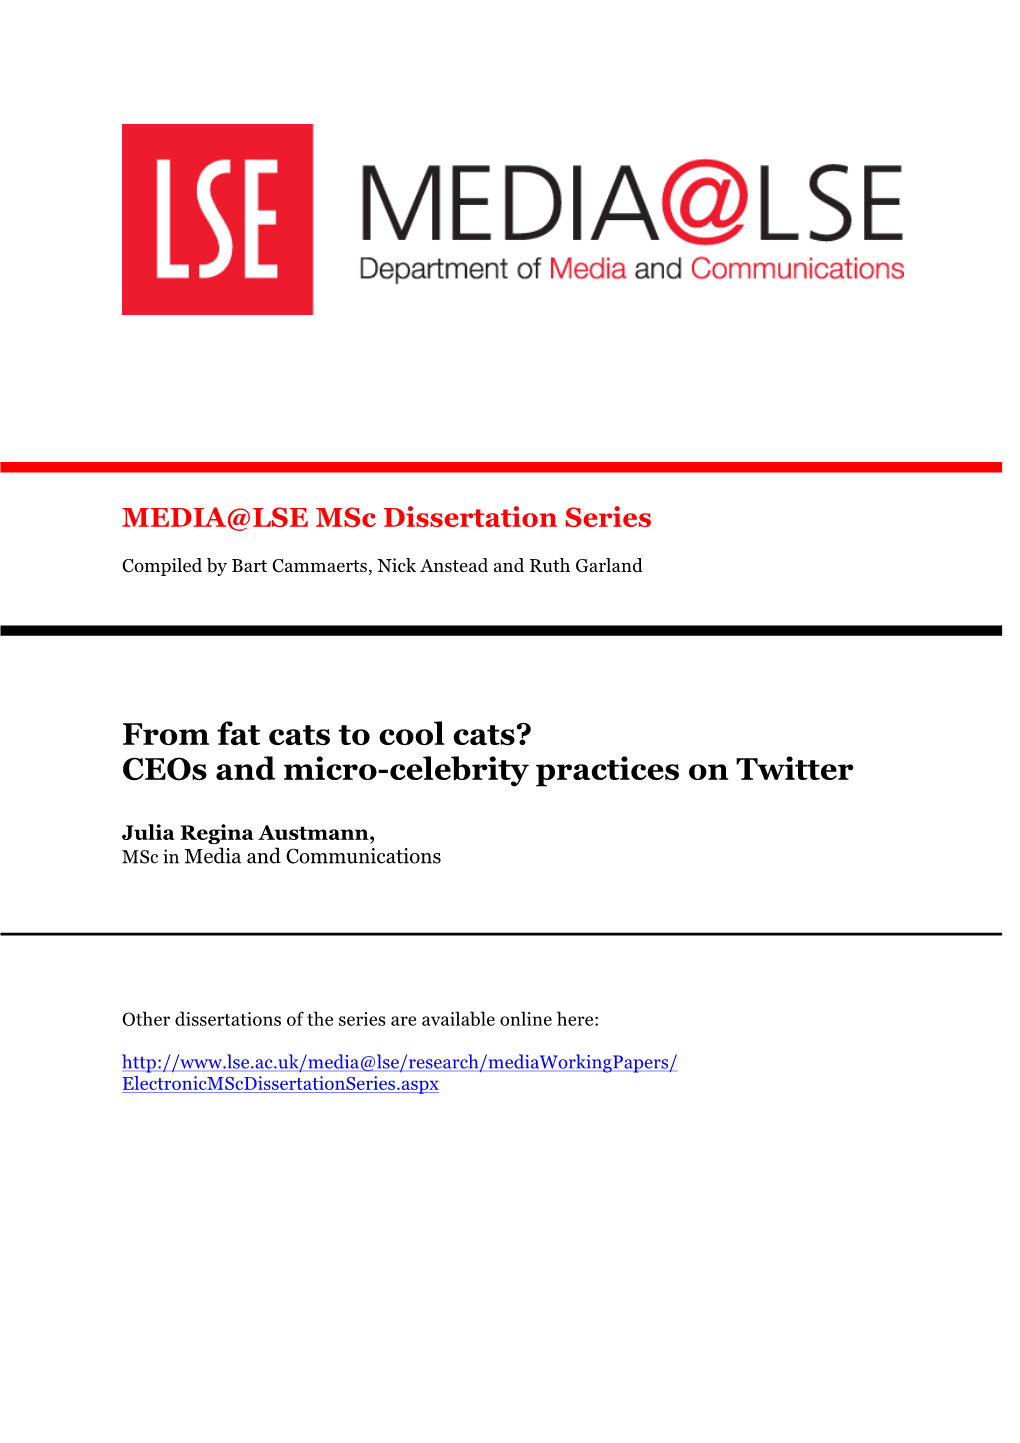 From Fat Cats to Cool Cats? Ceos and Micro-Celebrity Practices on Twitter